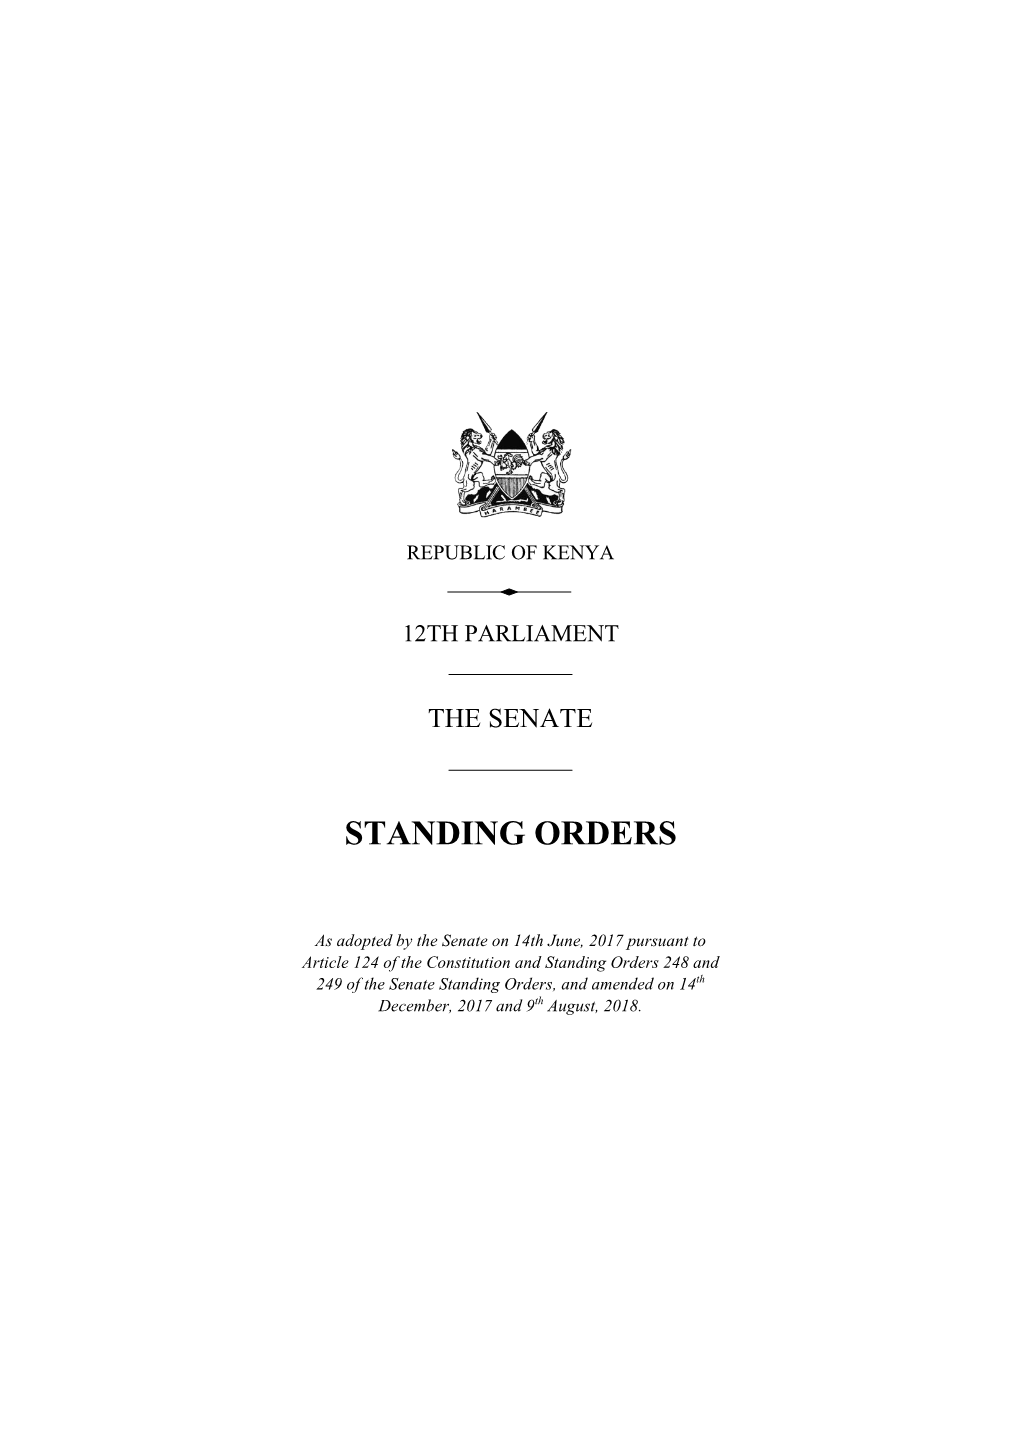 Standing Orders, the Senate Business Committee Shall, in Consultation with Parliamentary Parties, Nominate Senators Who Shall Serve on a Select Committee